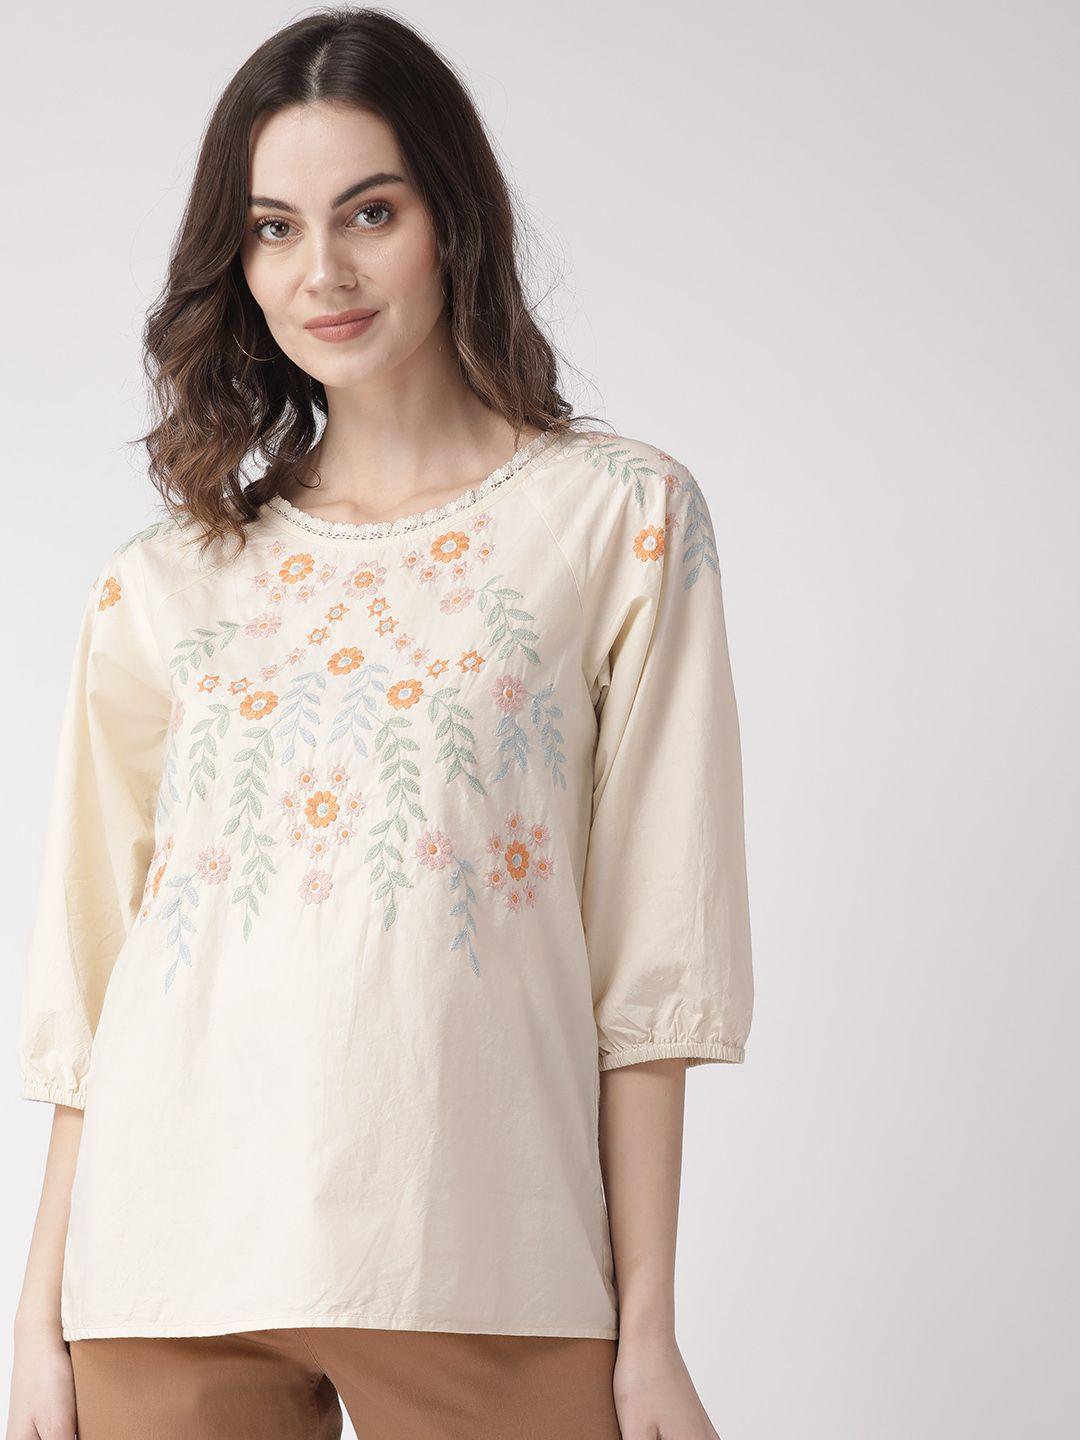 scoup women off-white & orange floral embroidered pure cotton top